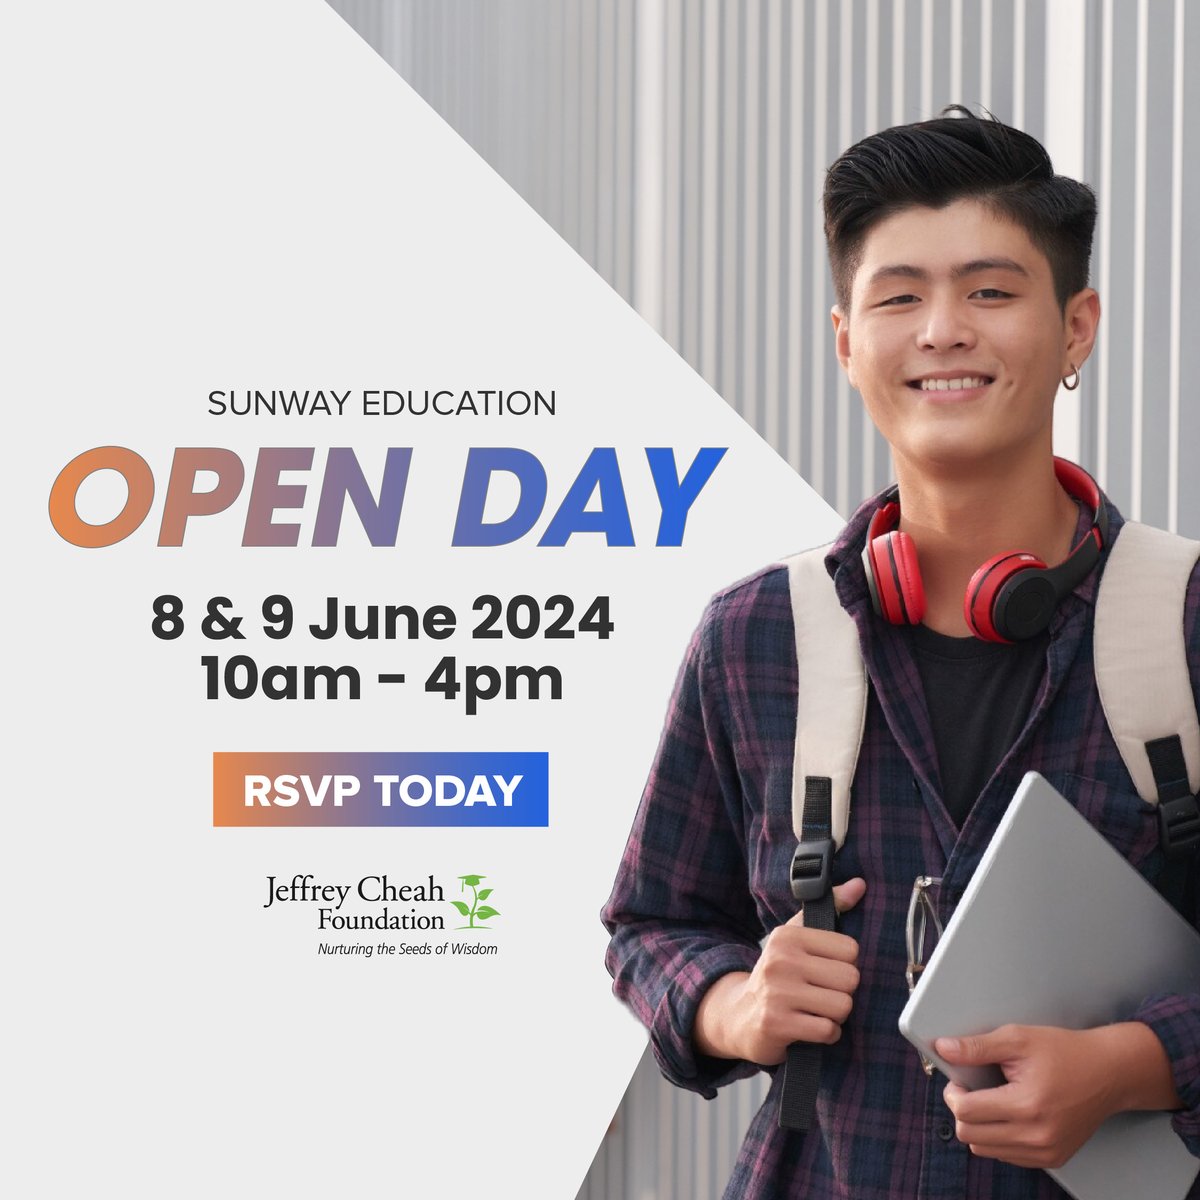 Are you looking to start a new chapter in your education journey? #SunEduOpenDay returns on the 8th & 9th June 2024 and we are delighted to assist you in finding your desired career pathways! 🤩🏫 For more information and registration, visit: my.sunway.edu.my/openday